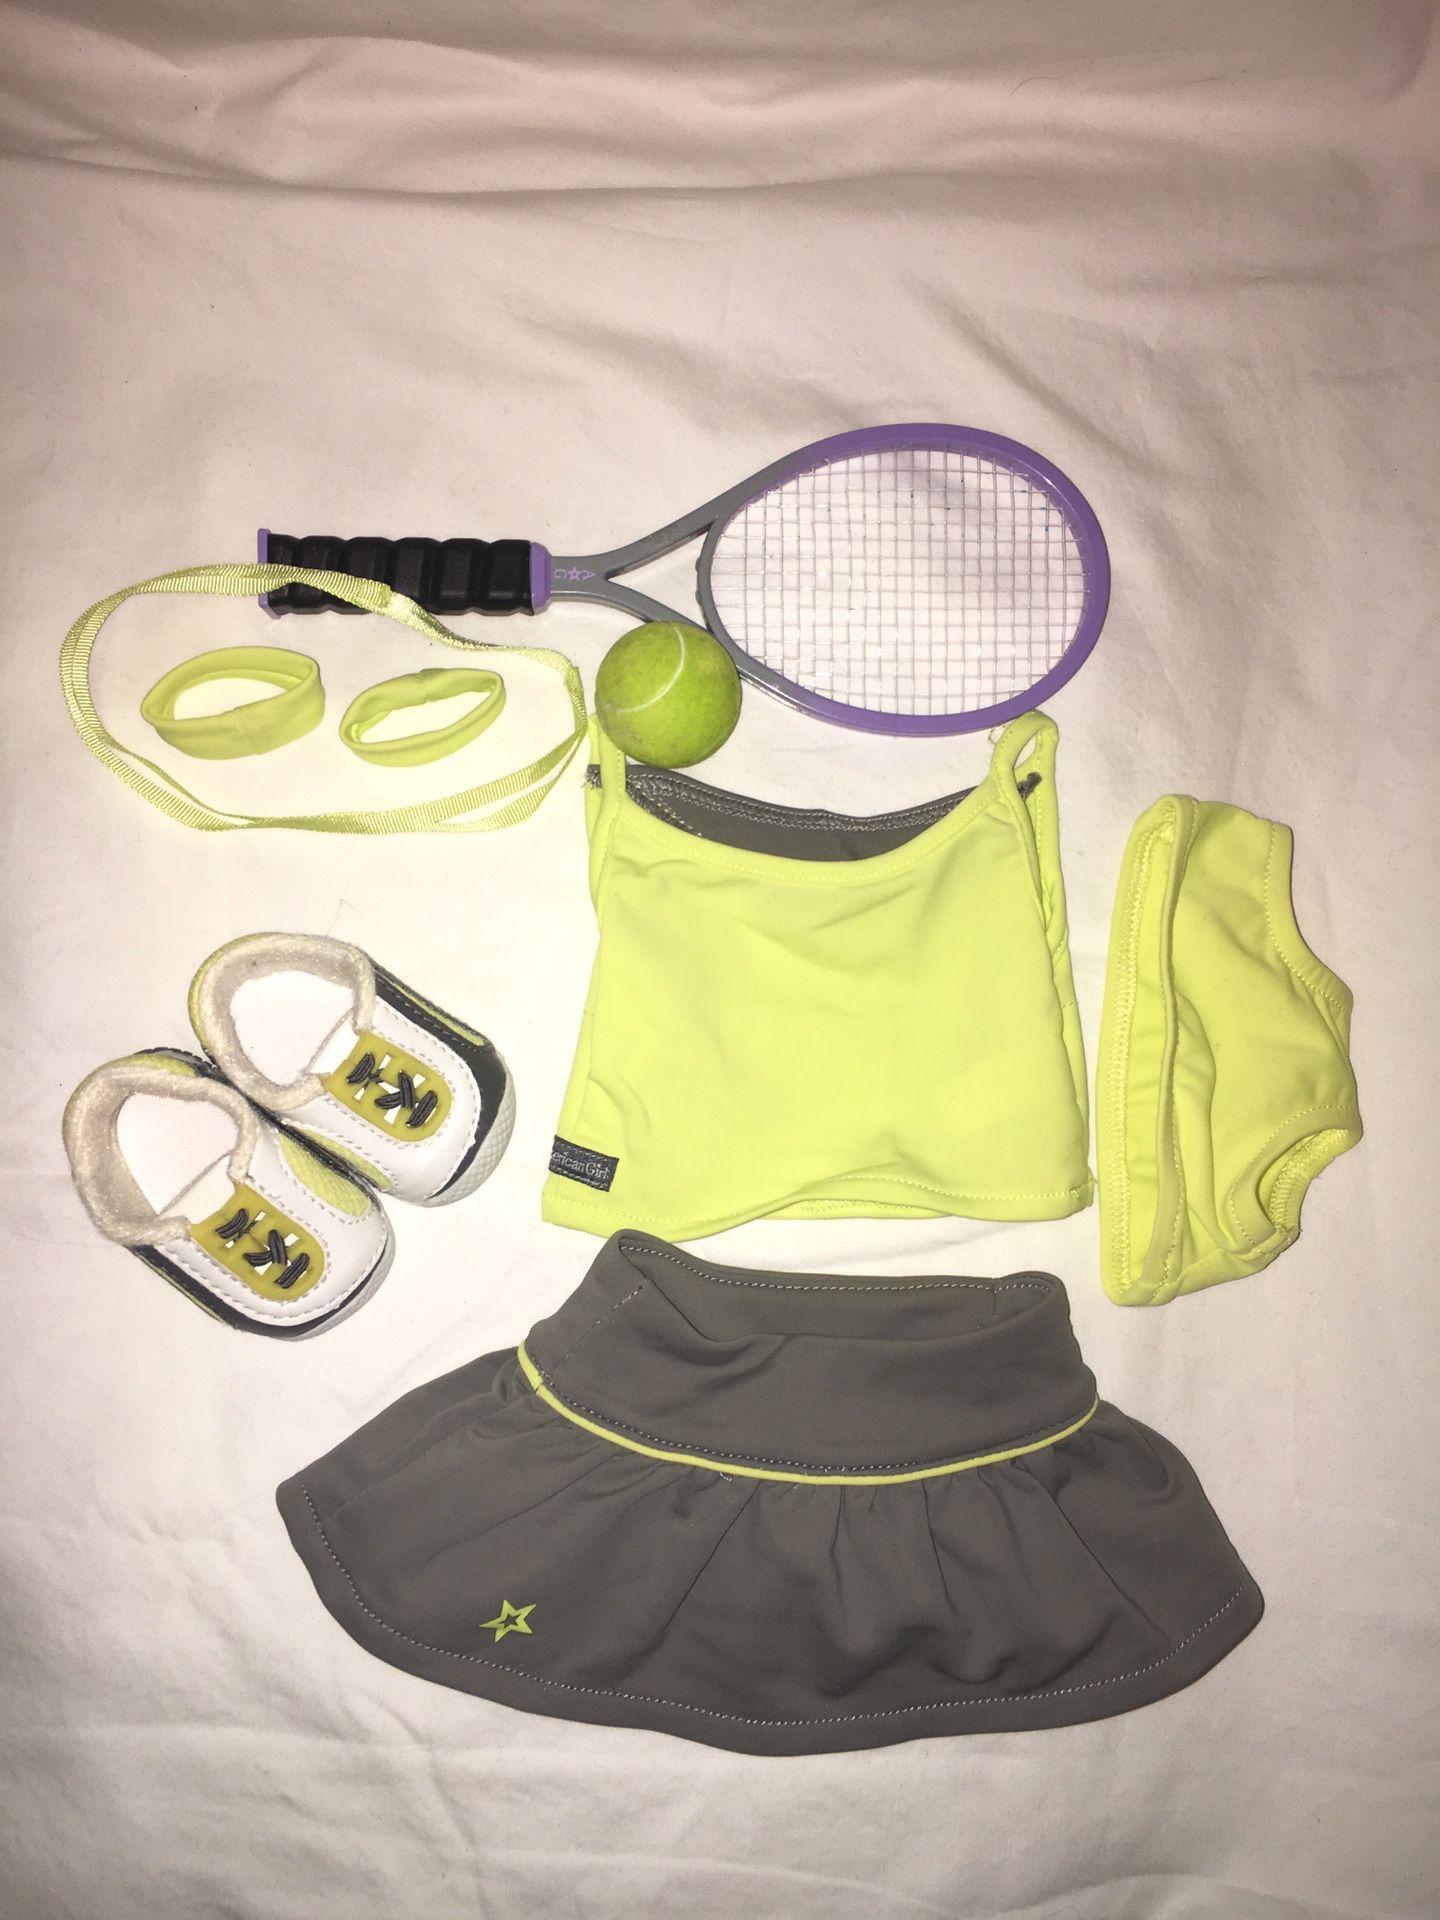 American Girl Doll Tennis Outfit